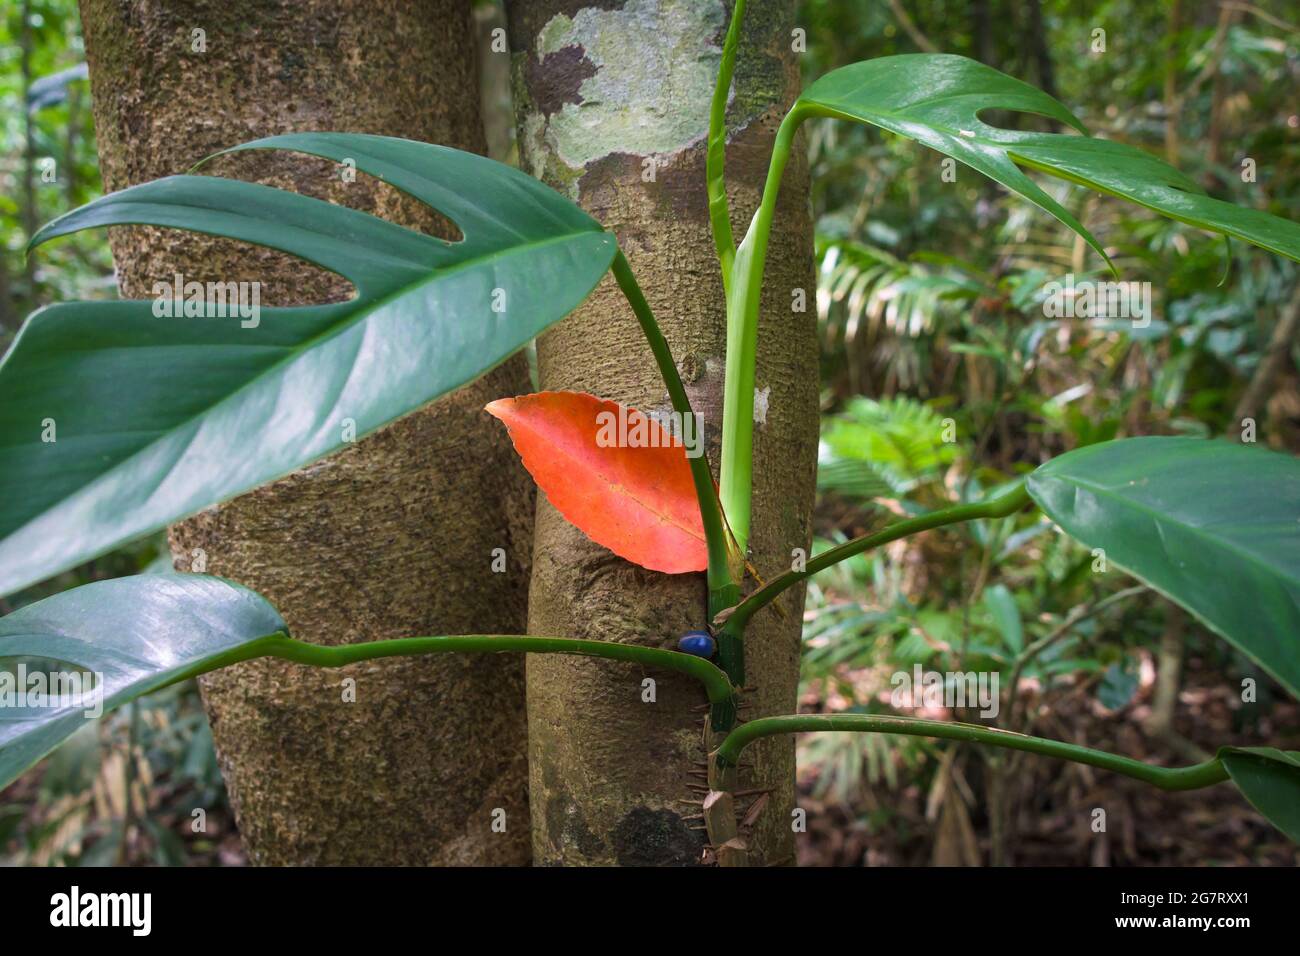 A close-up view of lush green epiphyte supporting a large fallen red leaf and vibrant purple tree seed at Lake Barrine, Atherton Tablelands, Australia. Stock Photo